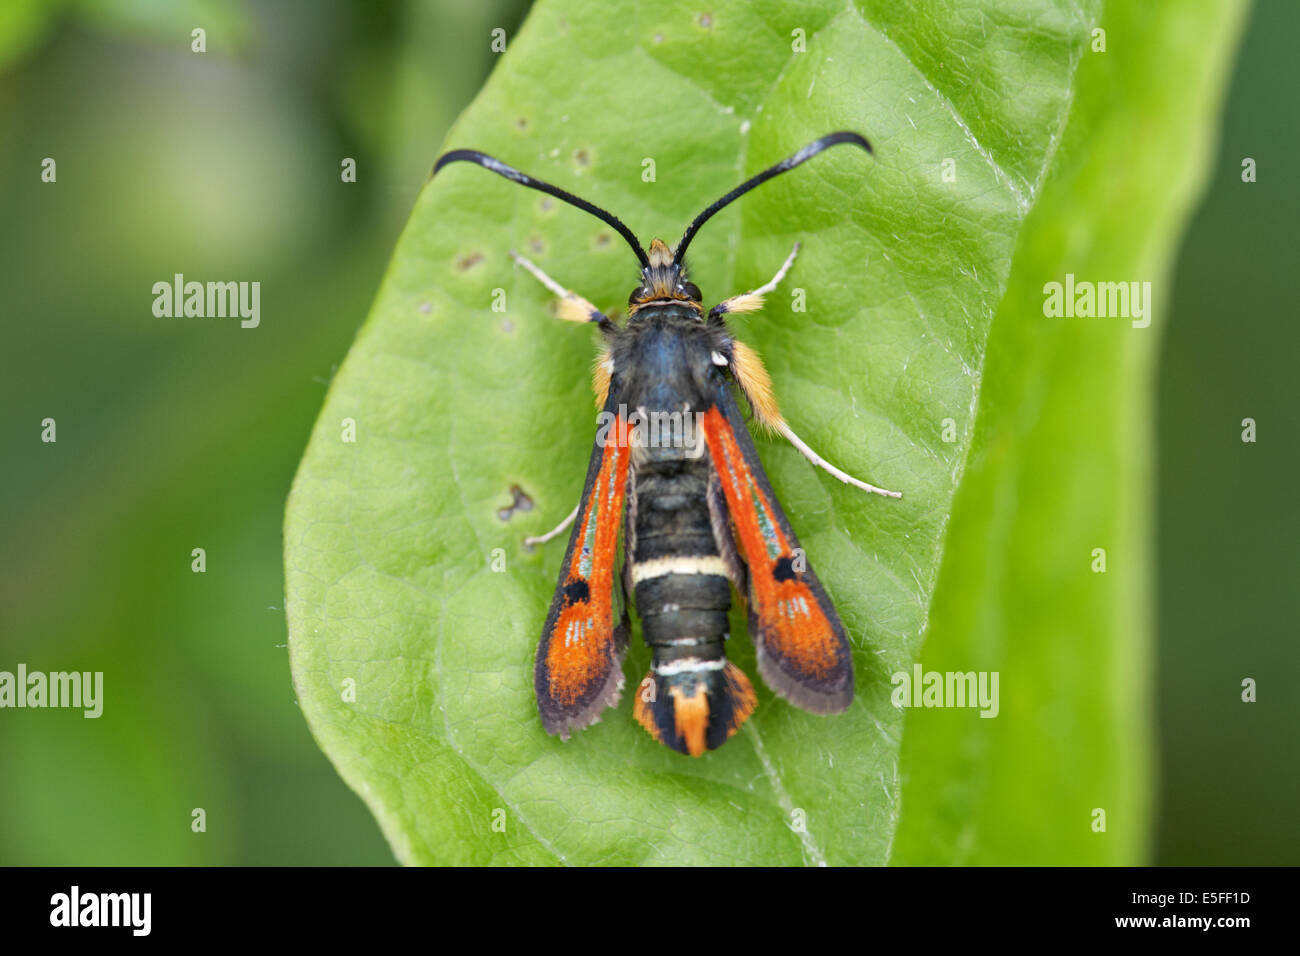 endangered Fiery Clearwing (Pyropteron chrysidiformis) moth on green leaf at les monts d'eraines near Falaise, Normandy, France in July Stock Photo